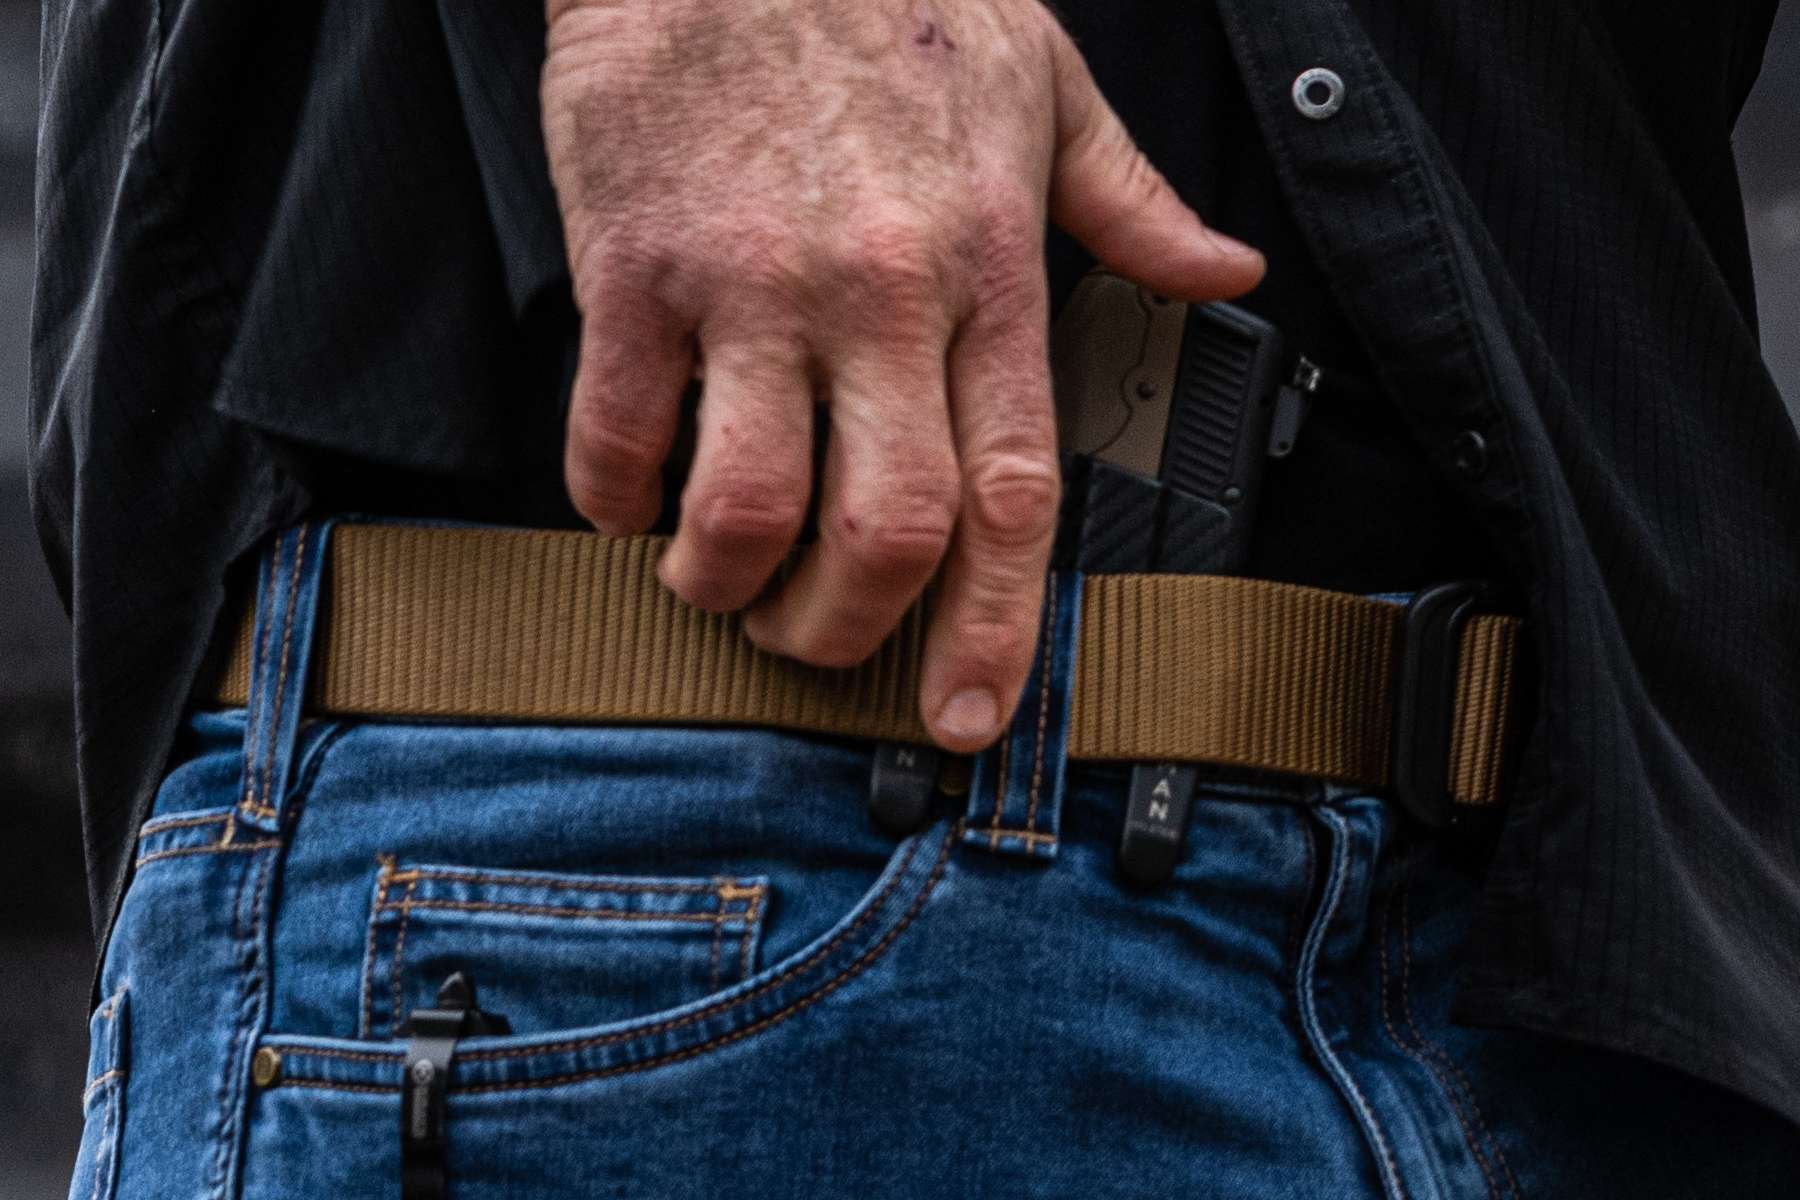 The Most Effective Belts for Concealed Carry